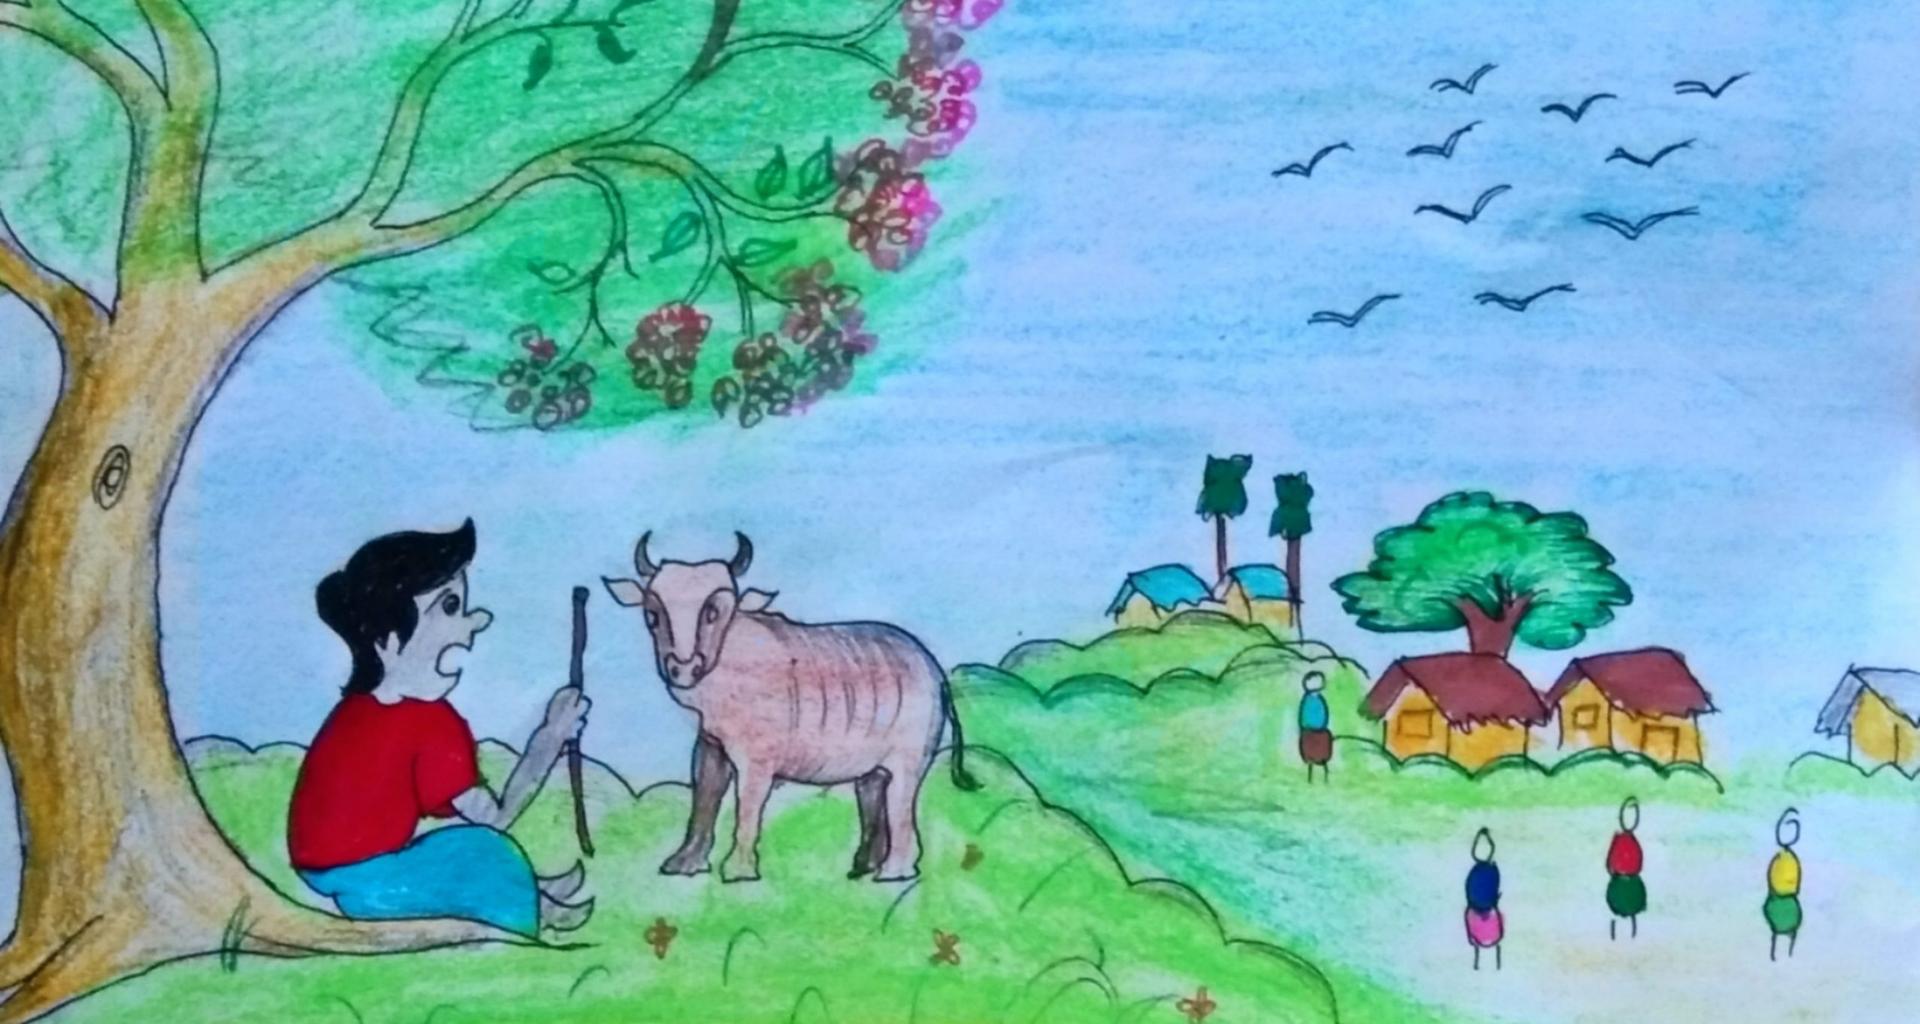 A drawing of a village scene with a person wearing a red shirt and a pig. 